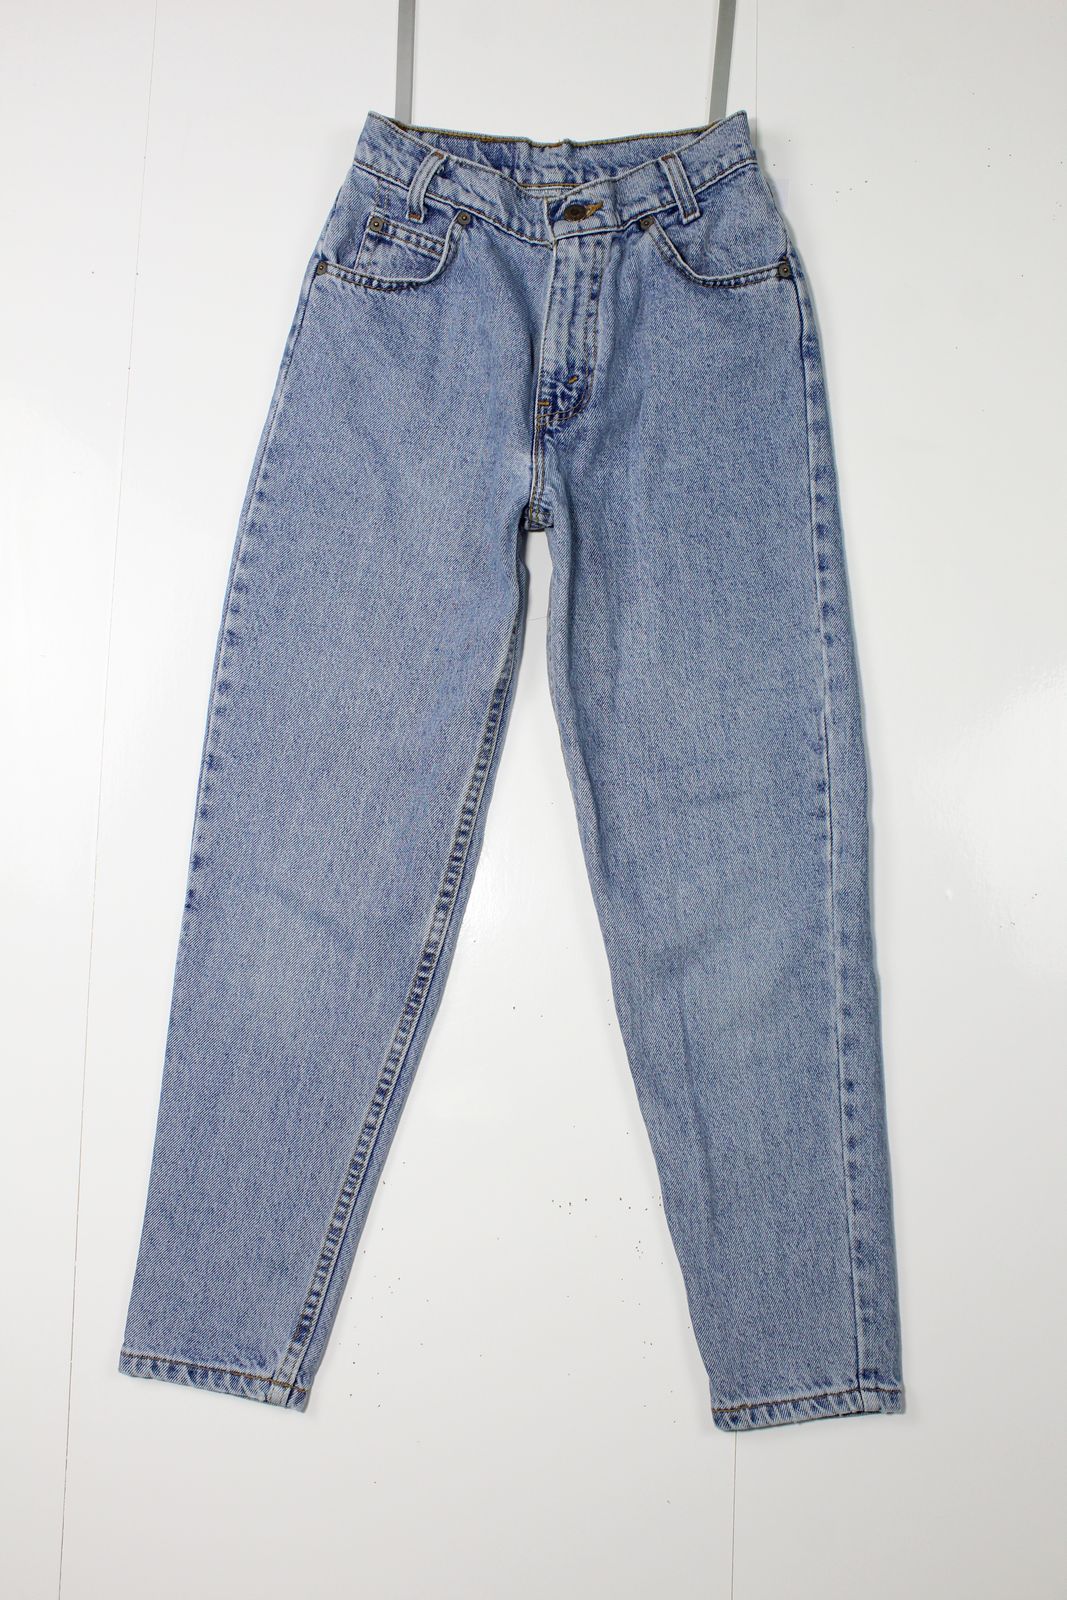 Levi's Orange Tab W25 Made In USA Jeans Vintage